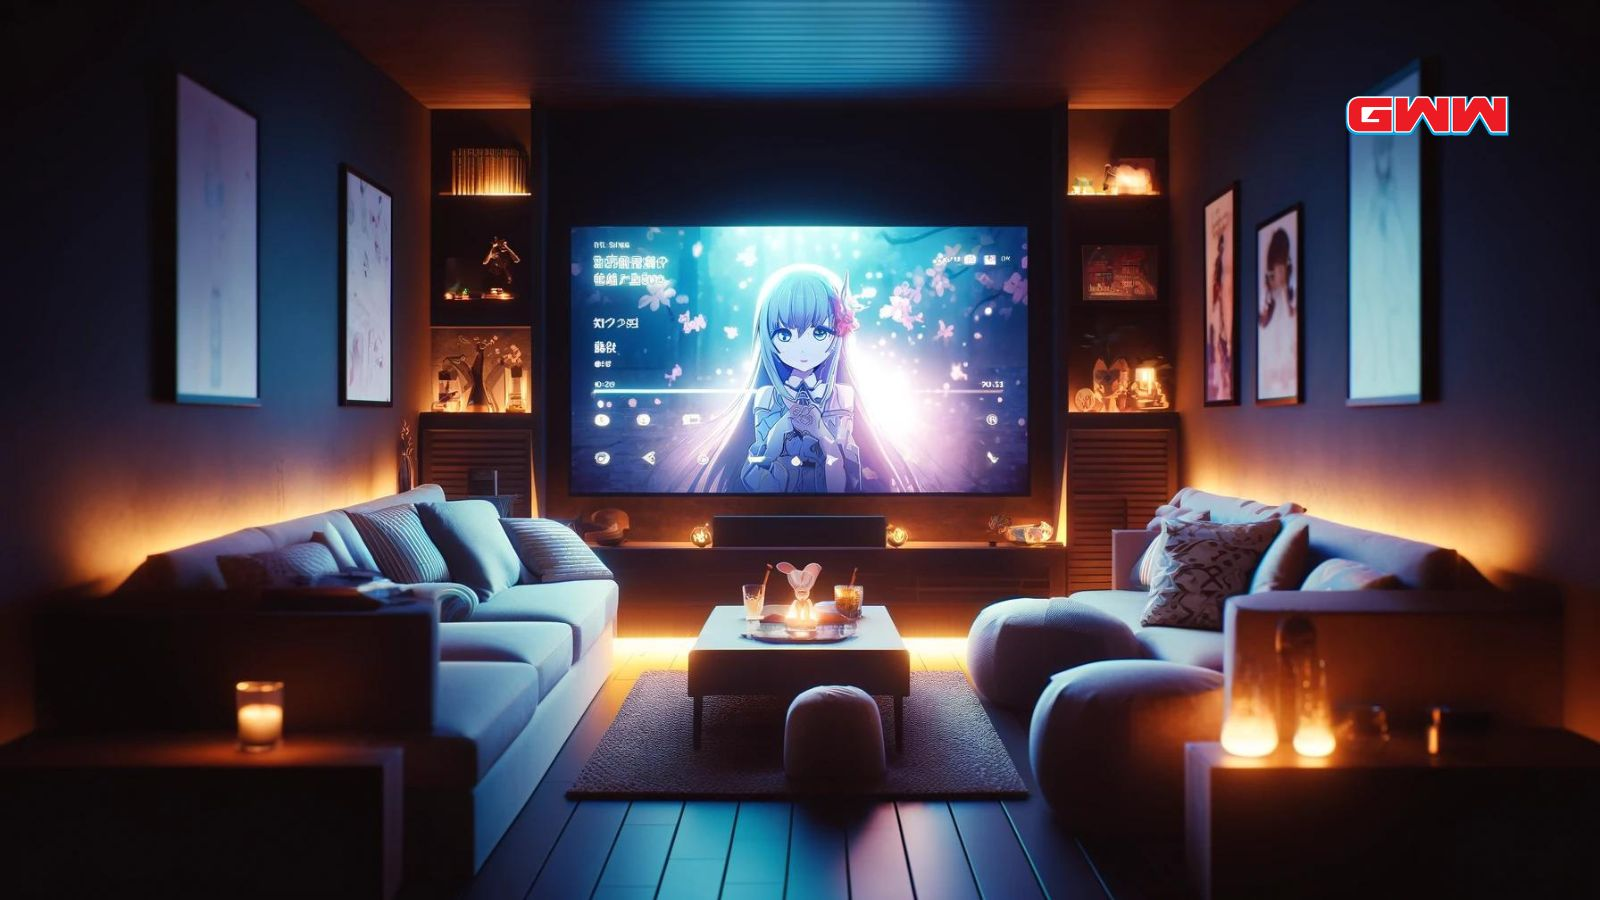 A cozy home entertainment setup designed for watching anime on the Anime-Planet website